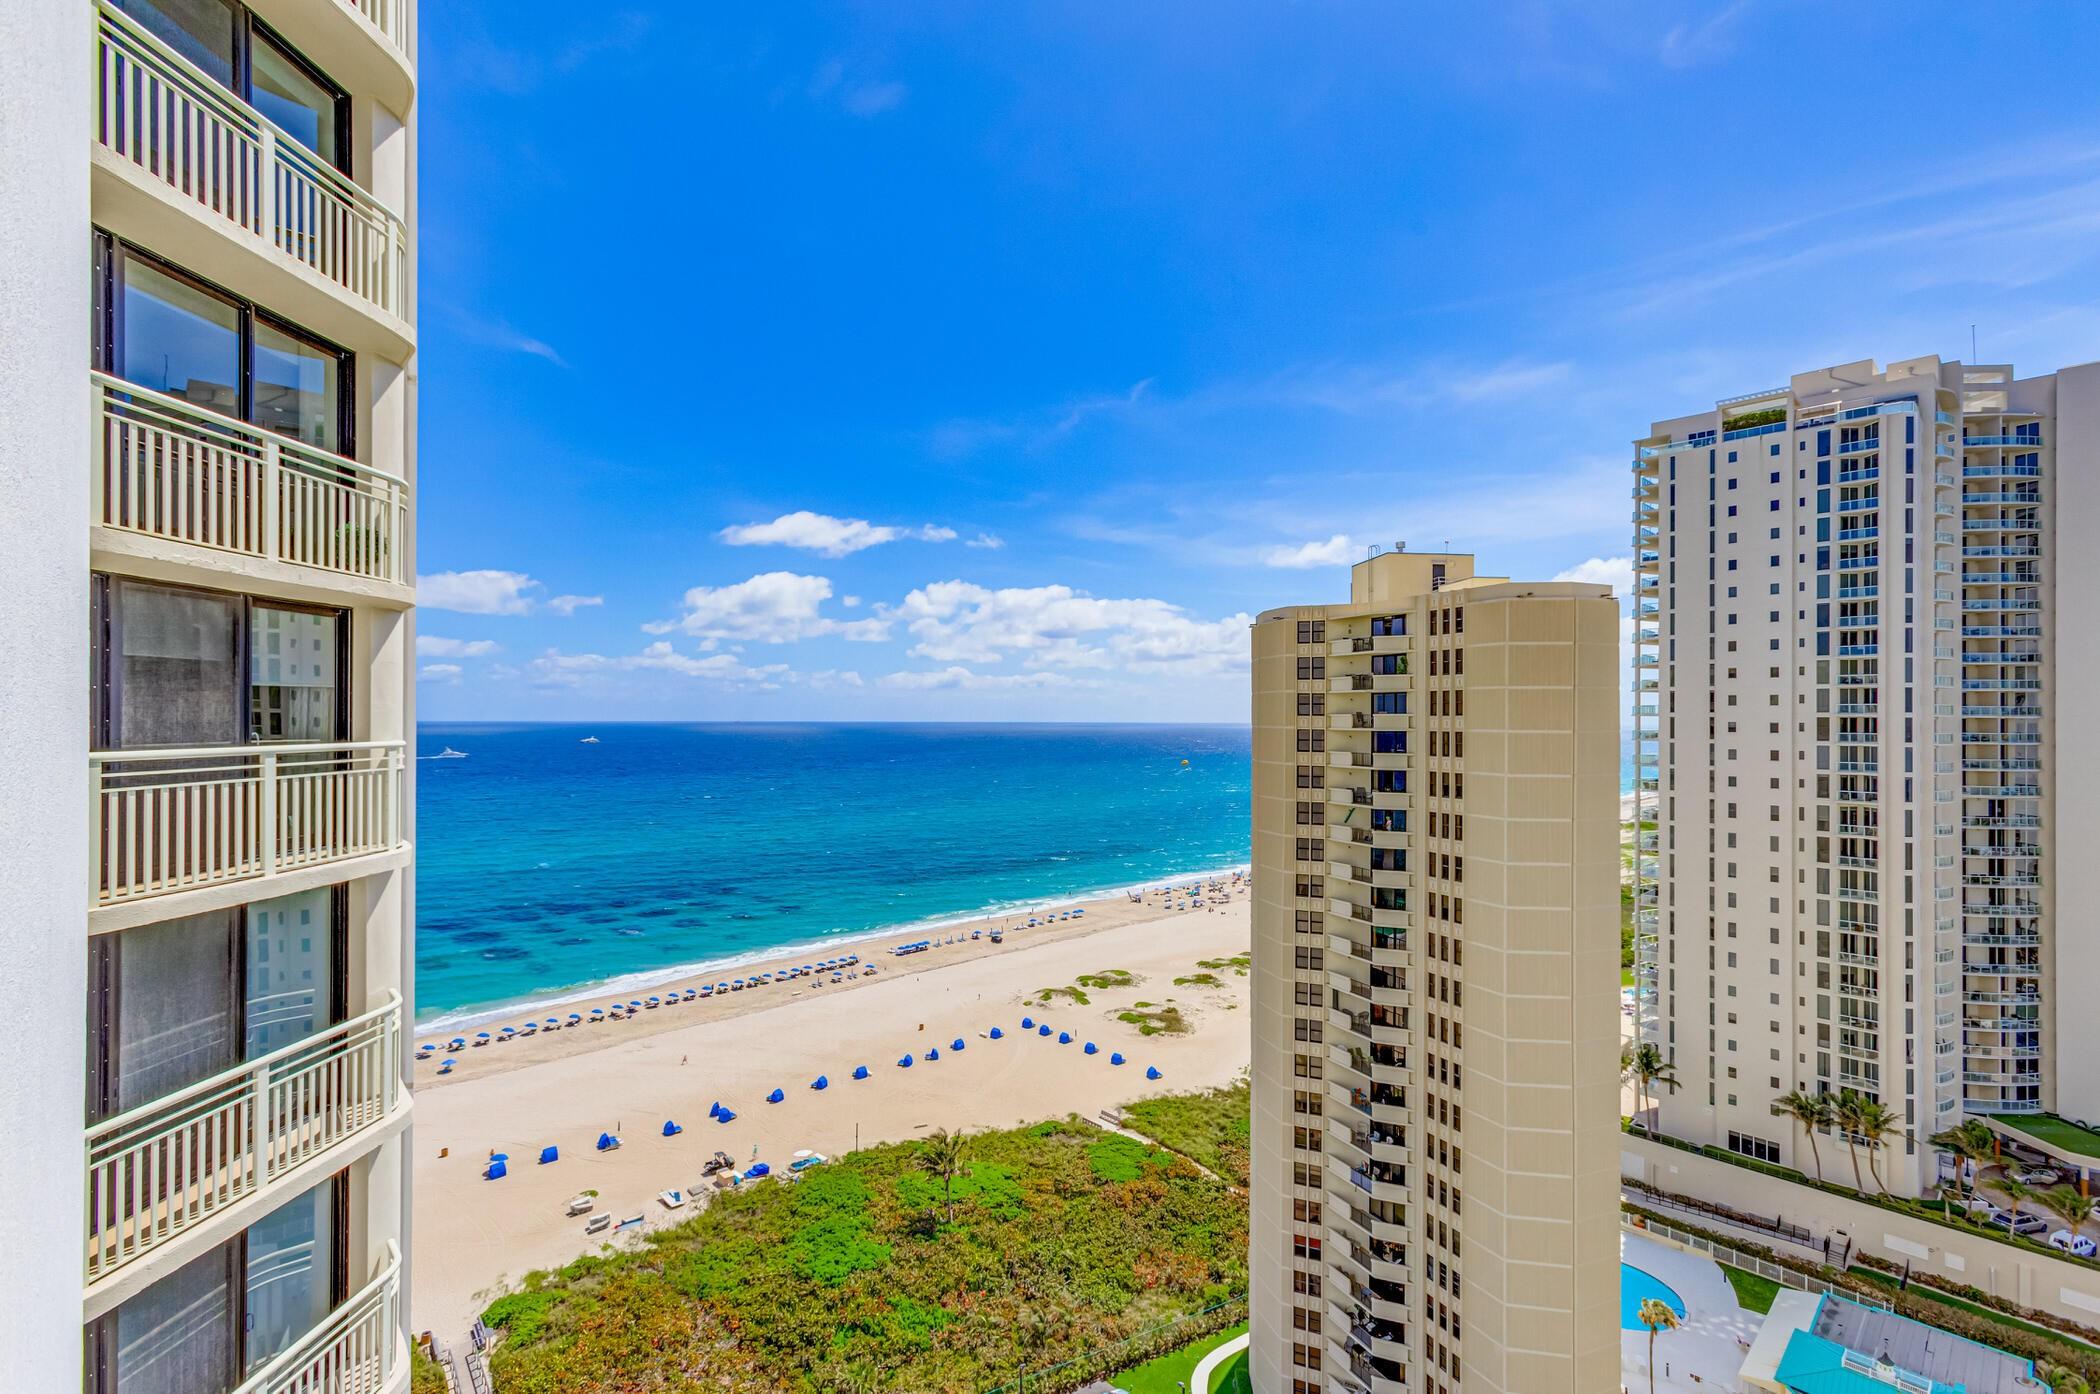 Property Image for 3000 N Ocean Drive 22-G